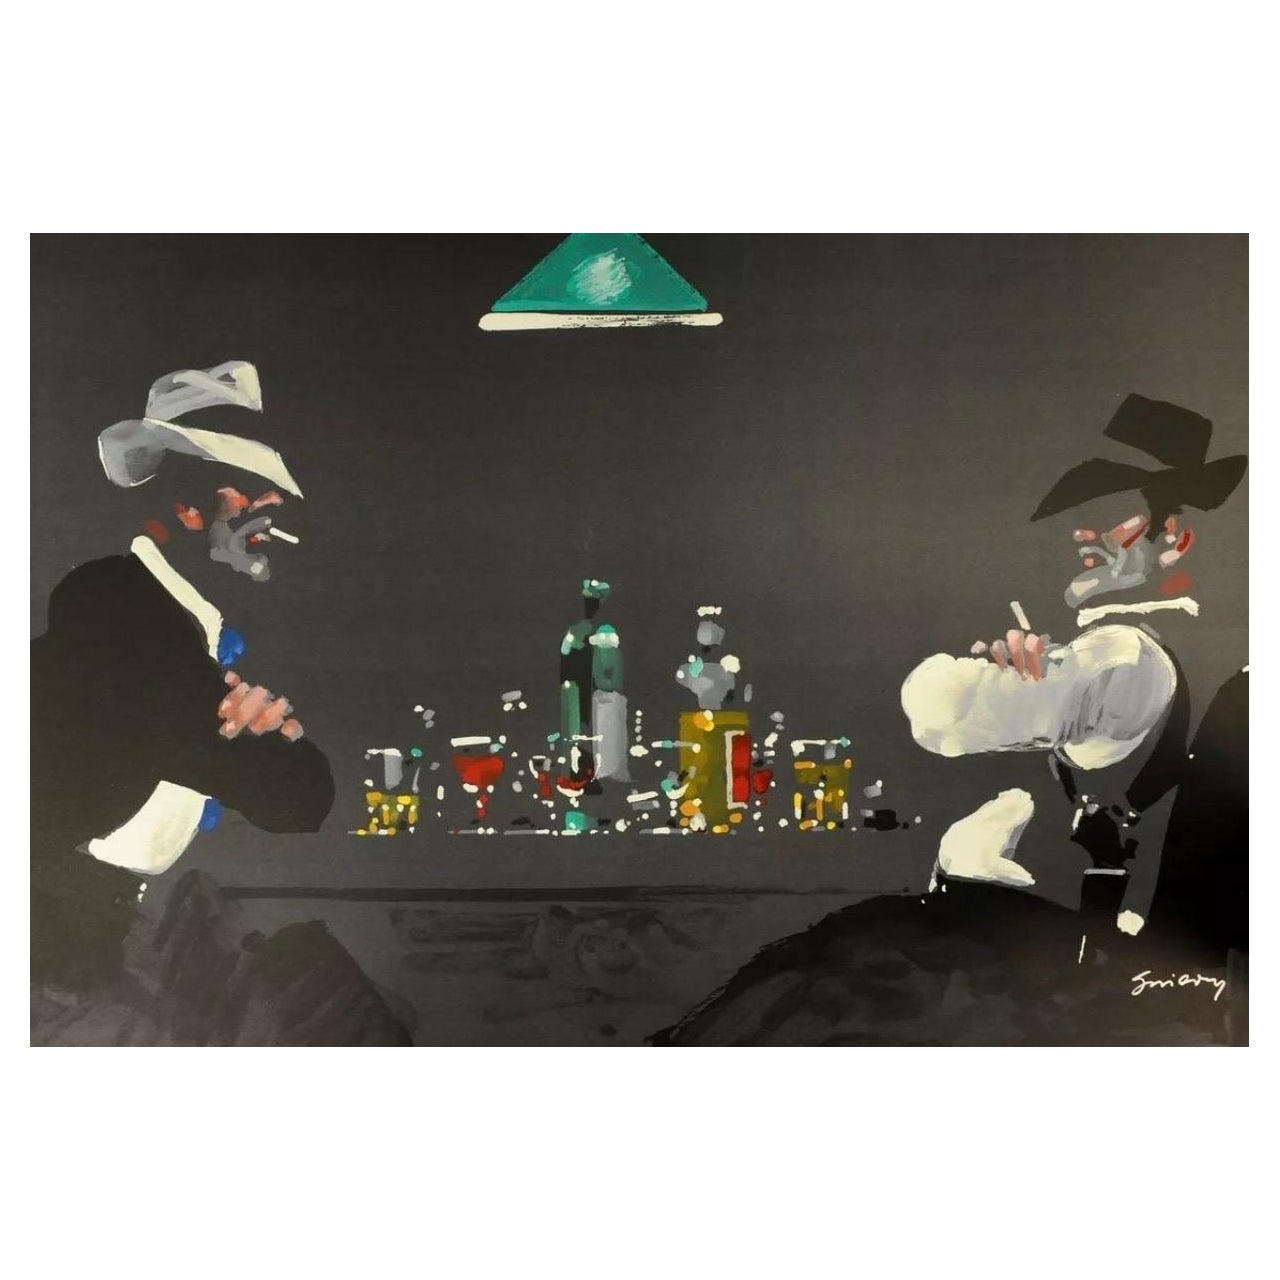 Signed Limited Edition Lithograph "Play for Keeps" by Waldemar Swierzy